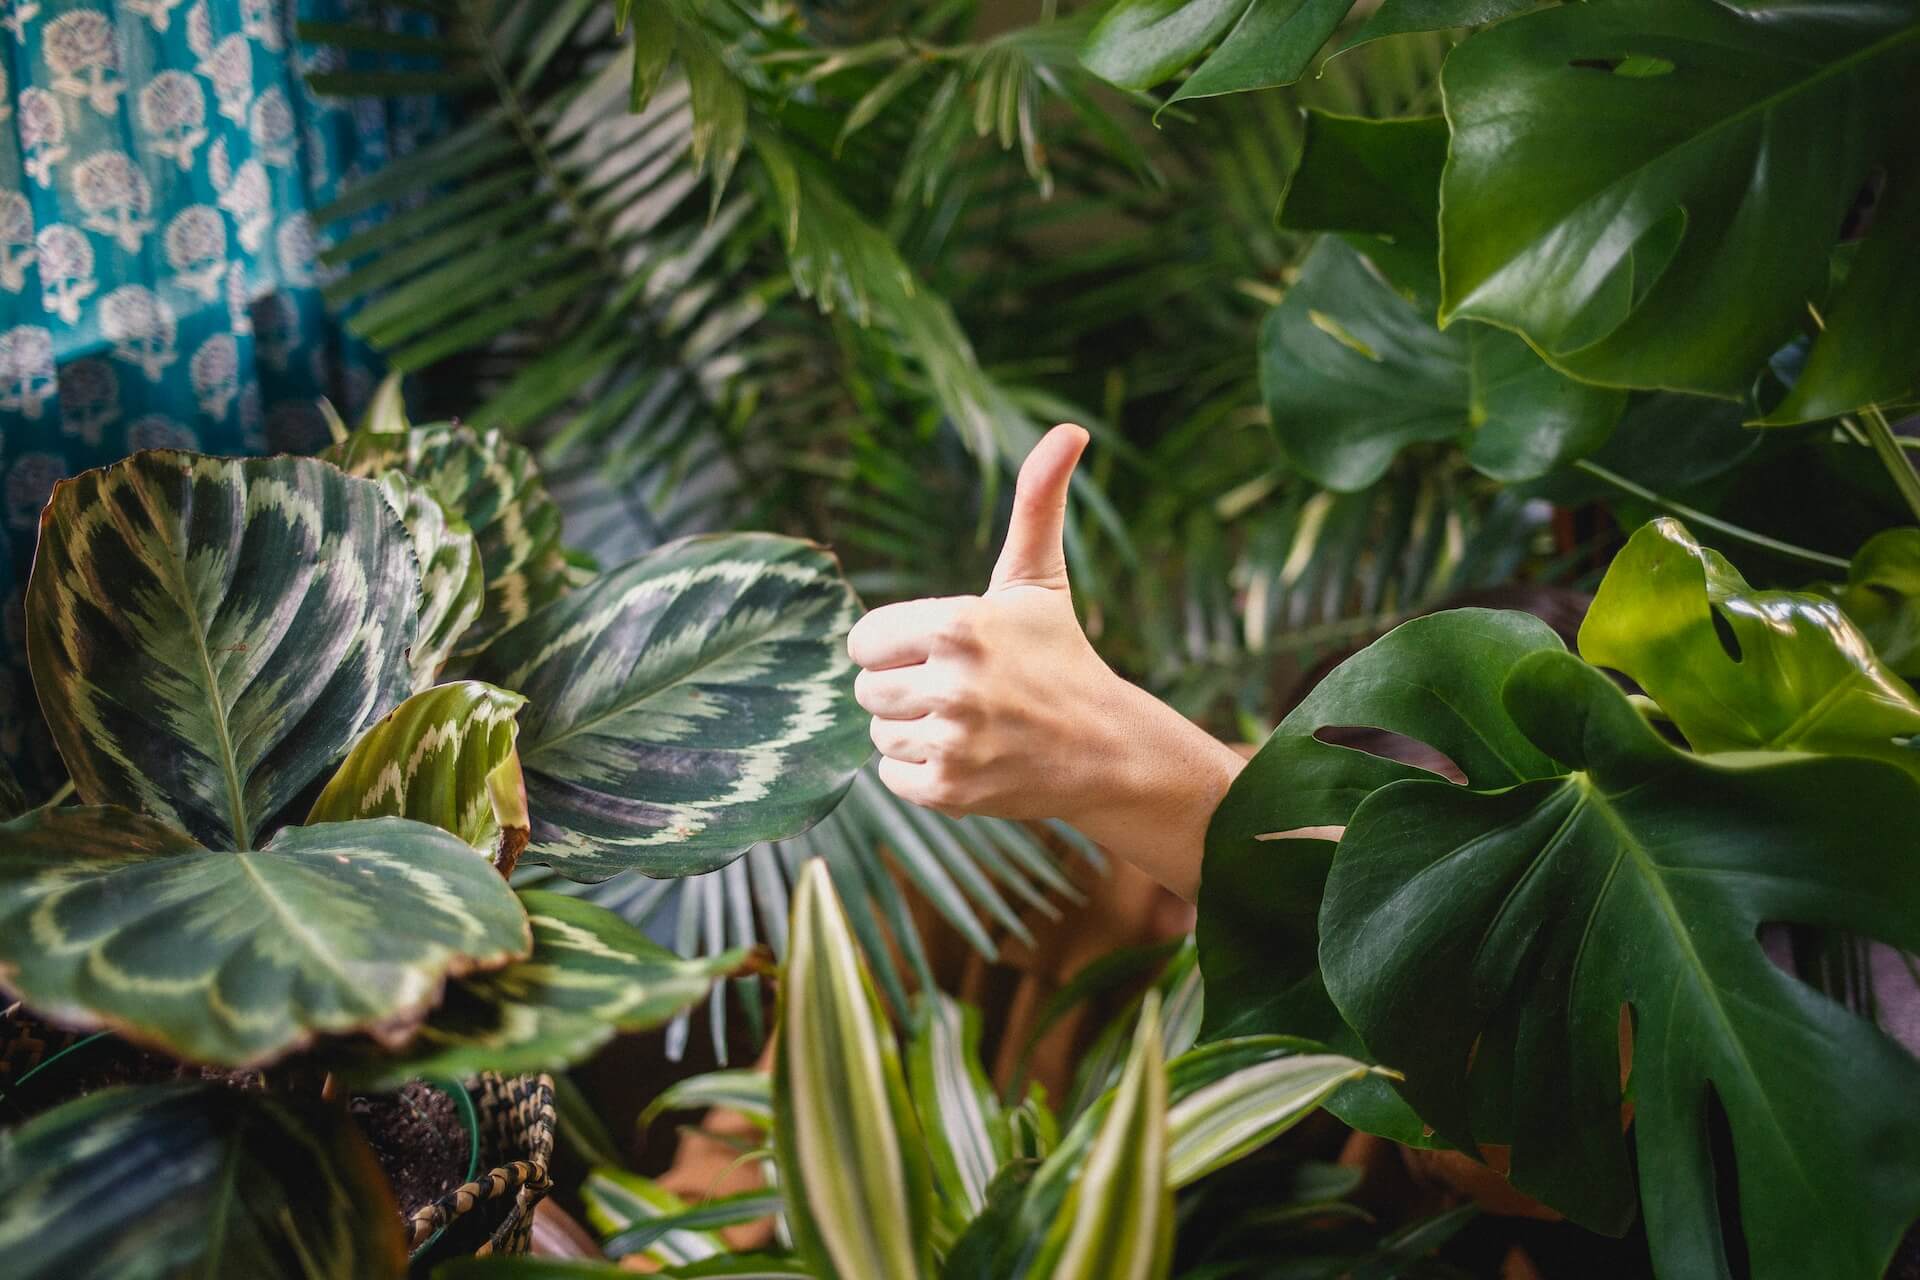 Thumbs up from somebody in an office, somewhat overrun with plants.